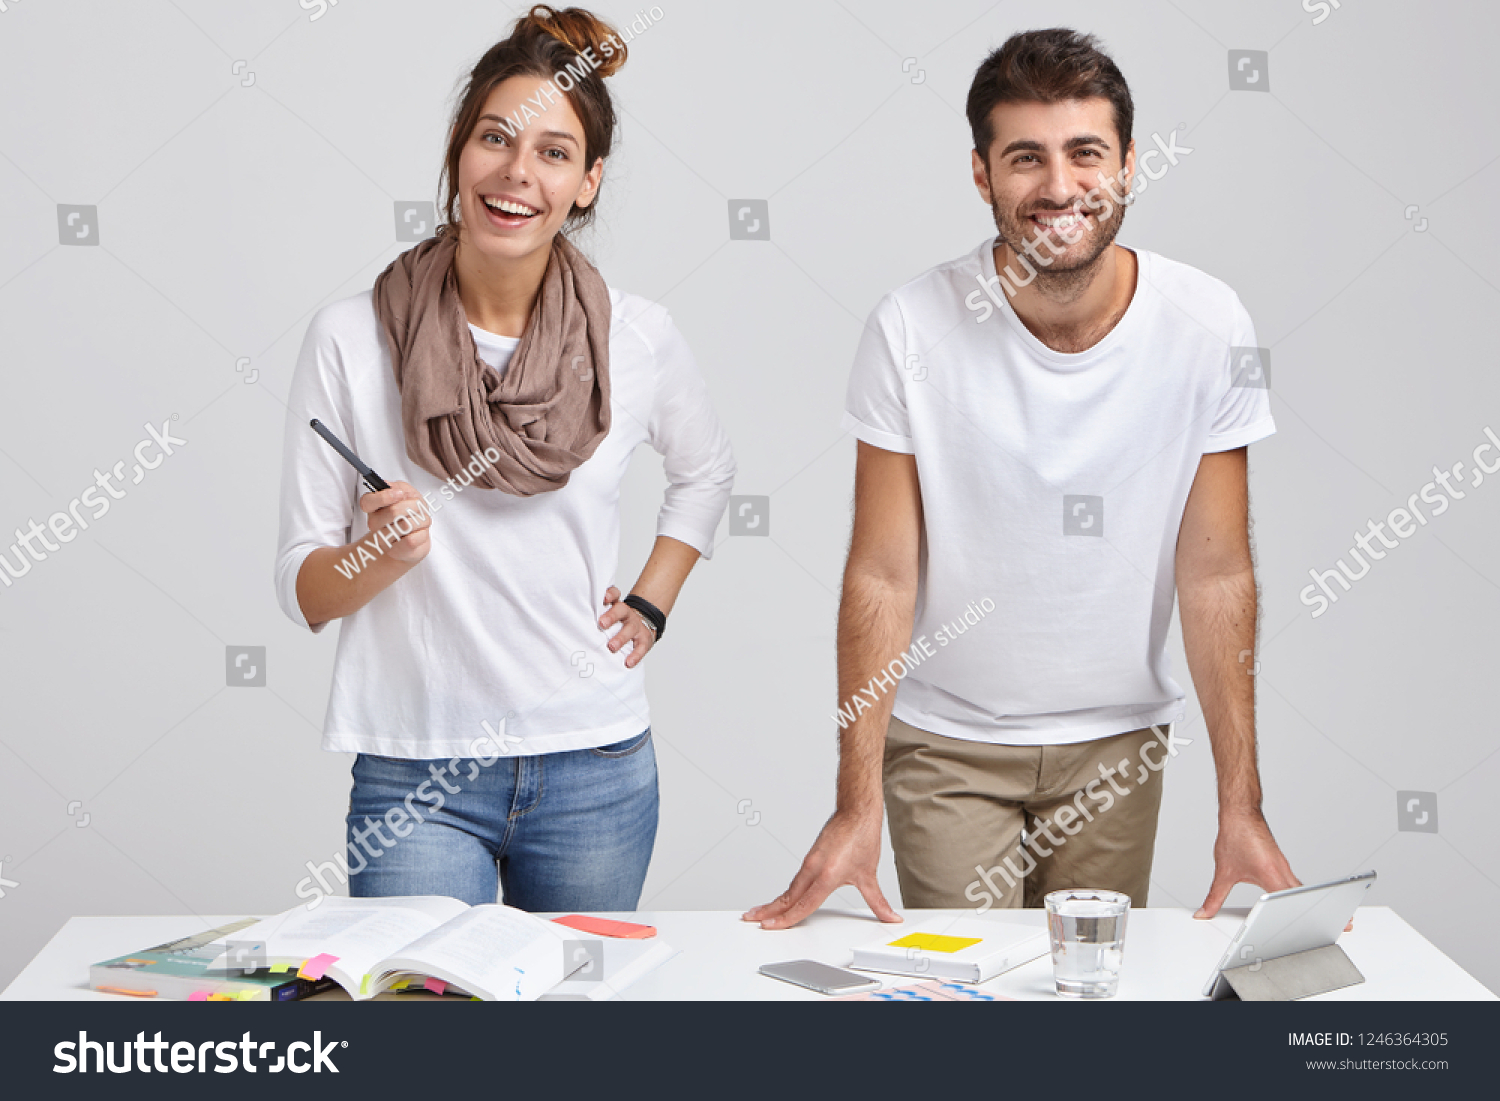 Photo of cheerful woman and man designers dressed in fashionable clothes, stand near white desk, study literature, make project work on tablet, connected to wireless internet. People and profession #1246364305